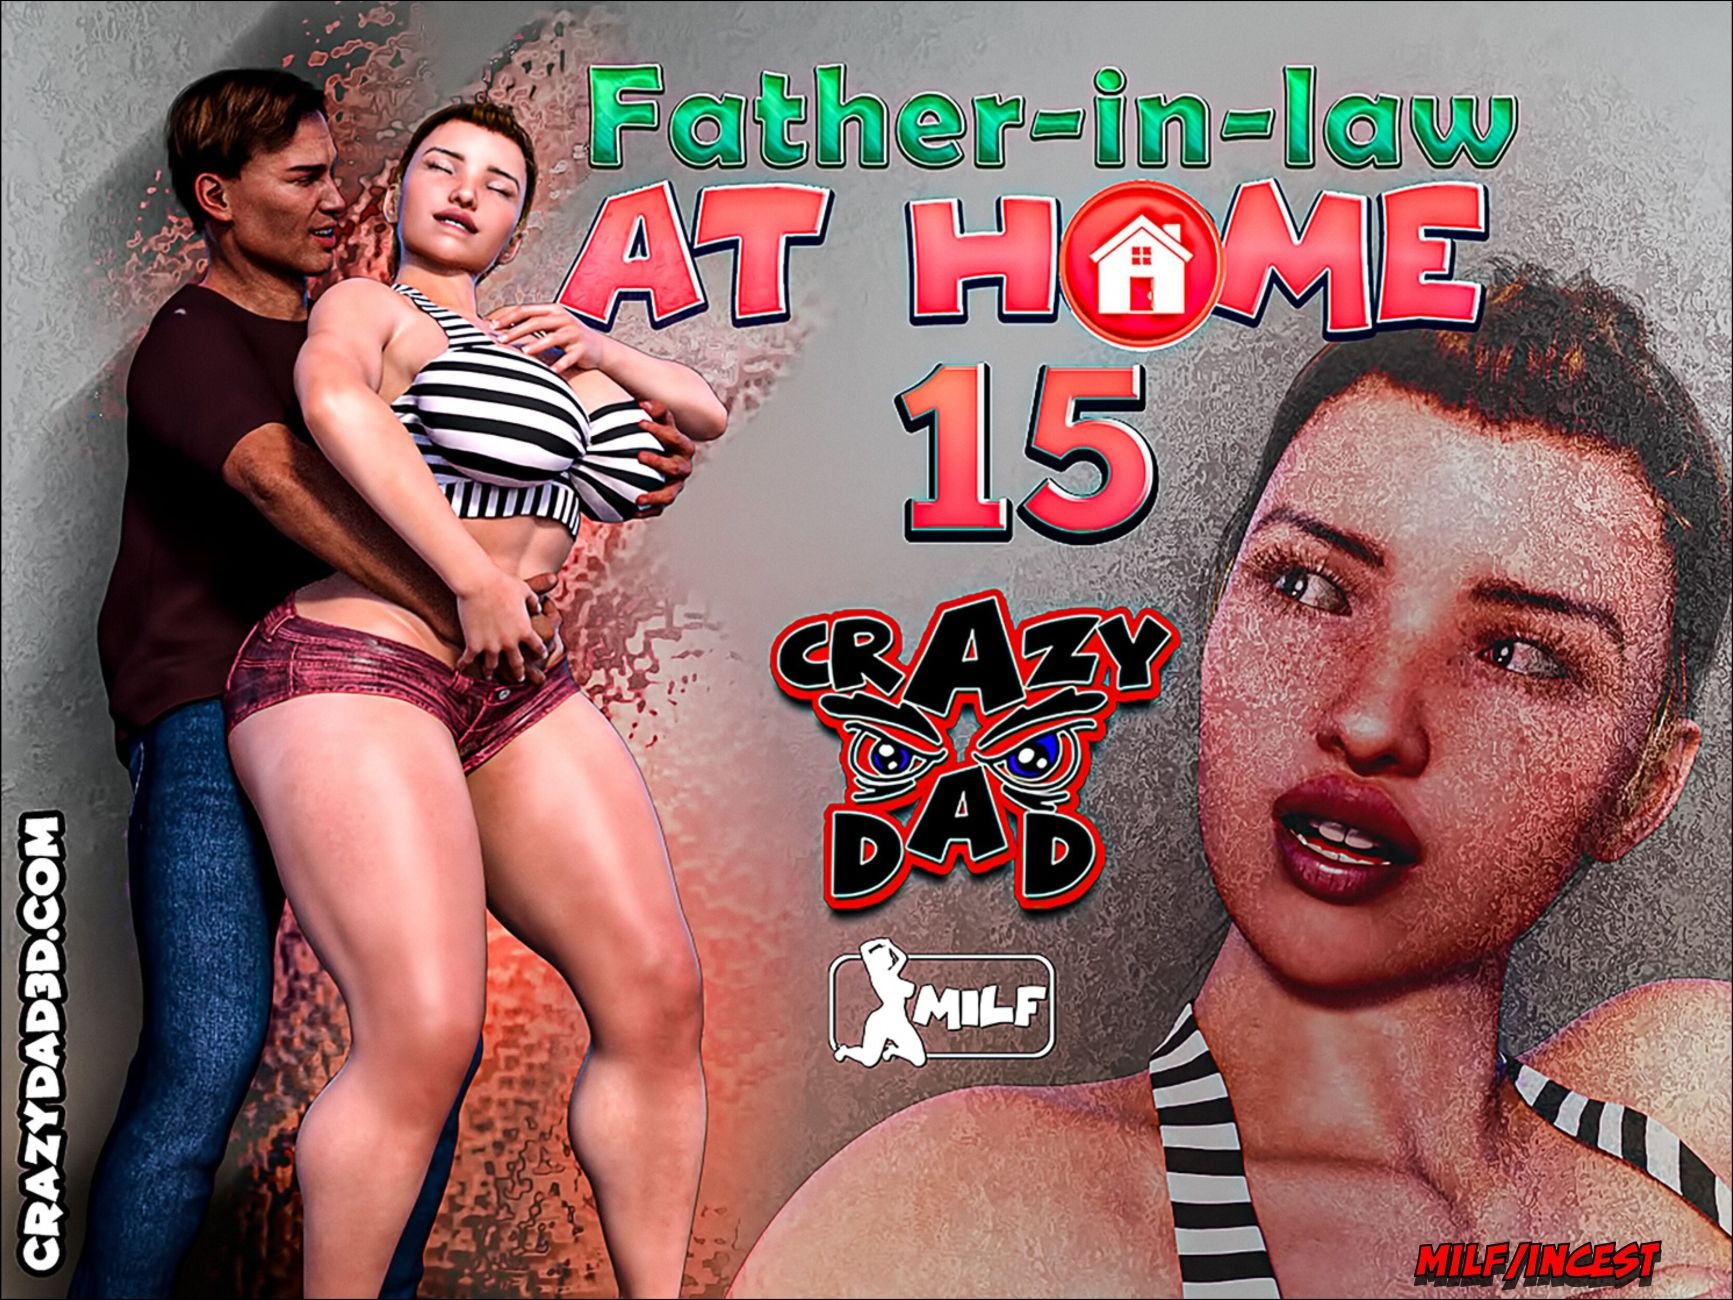 Crazy Dad 3d â€“ Father-in-law at home 15 - TeenSpiritHentai